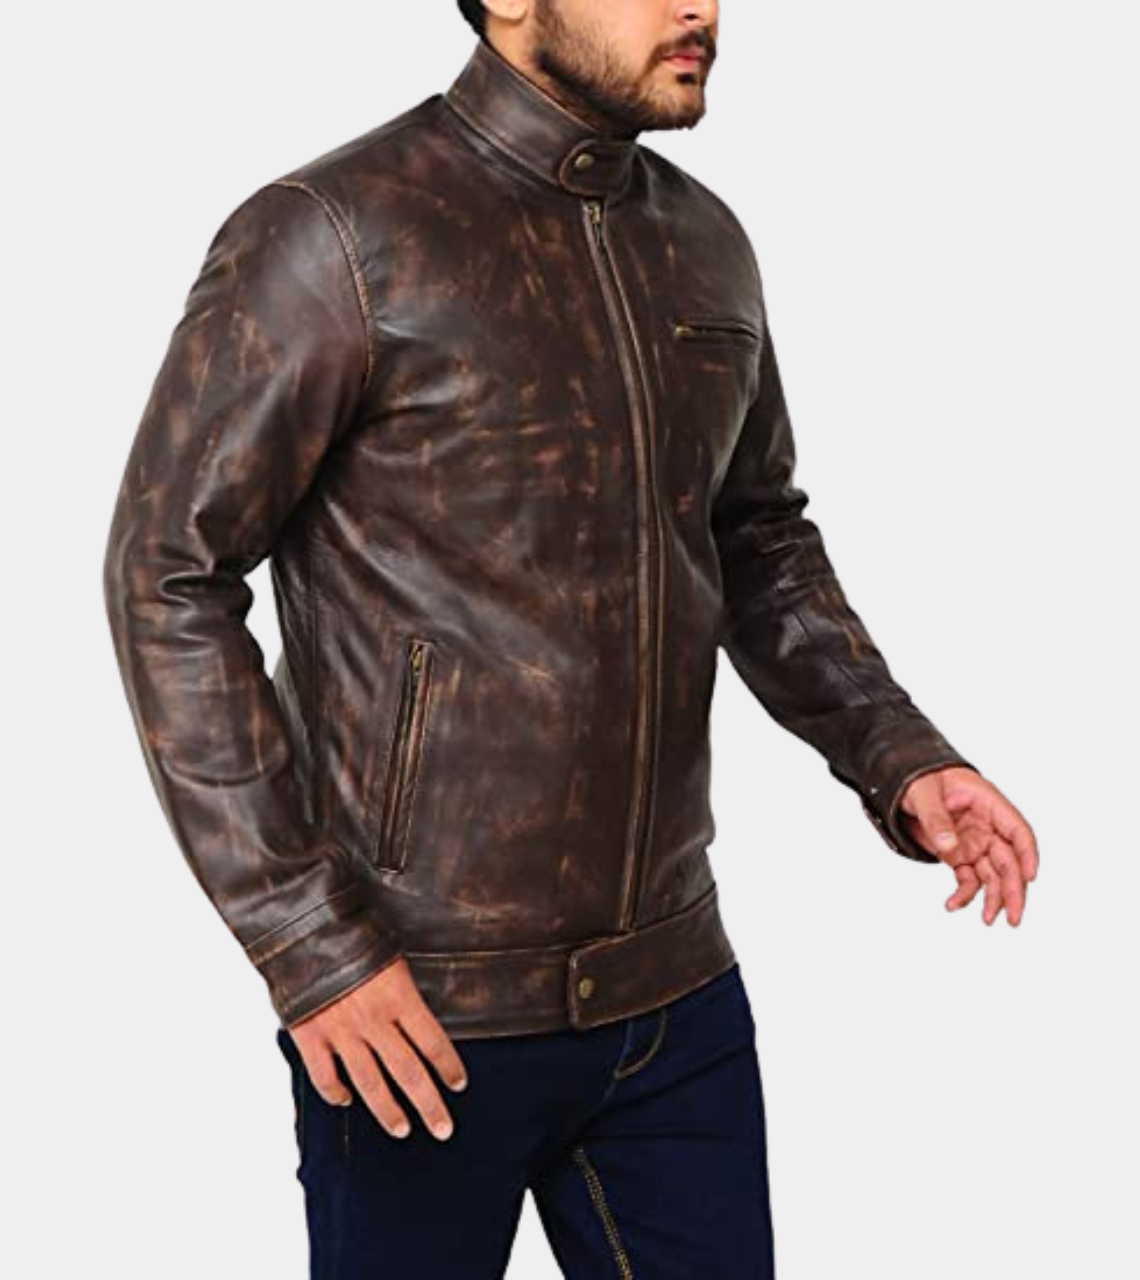 Faded Brown Distressed Leather Jacket For Men's